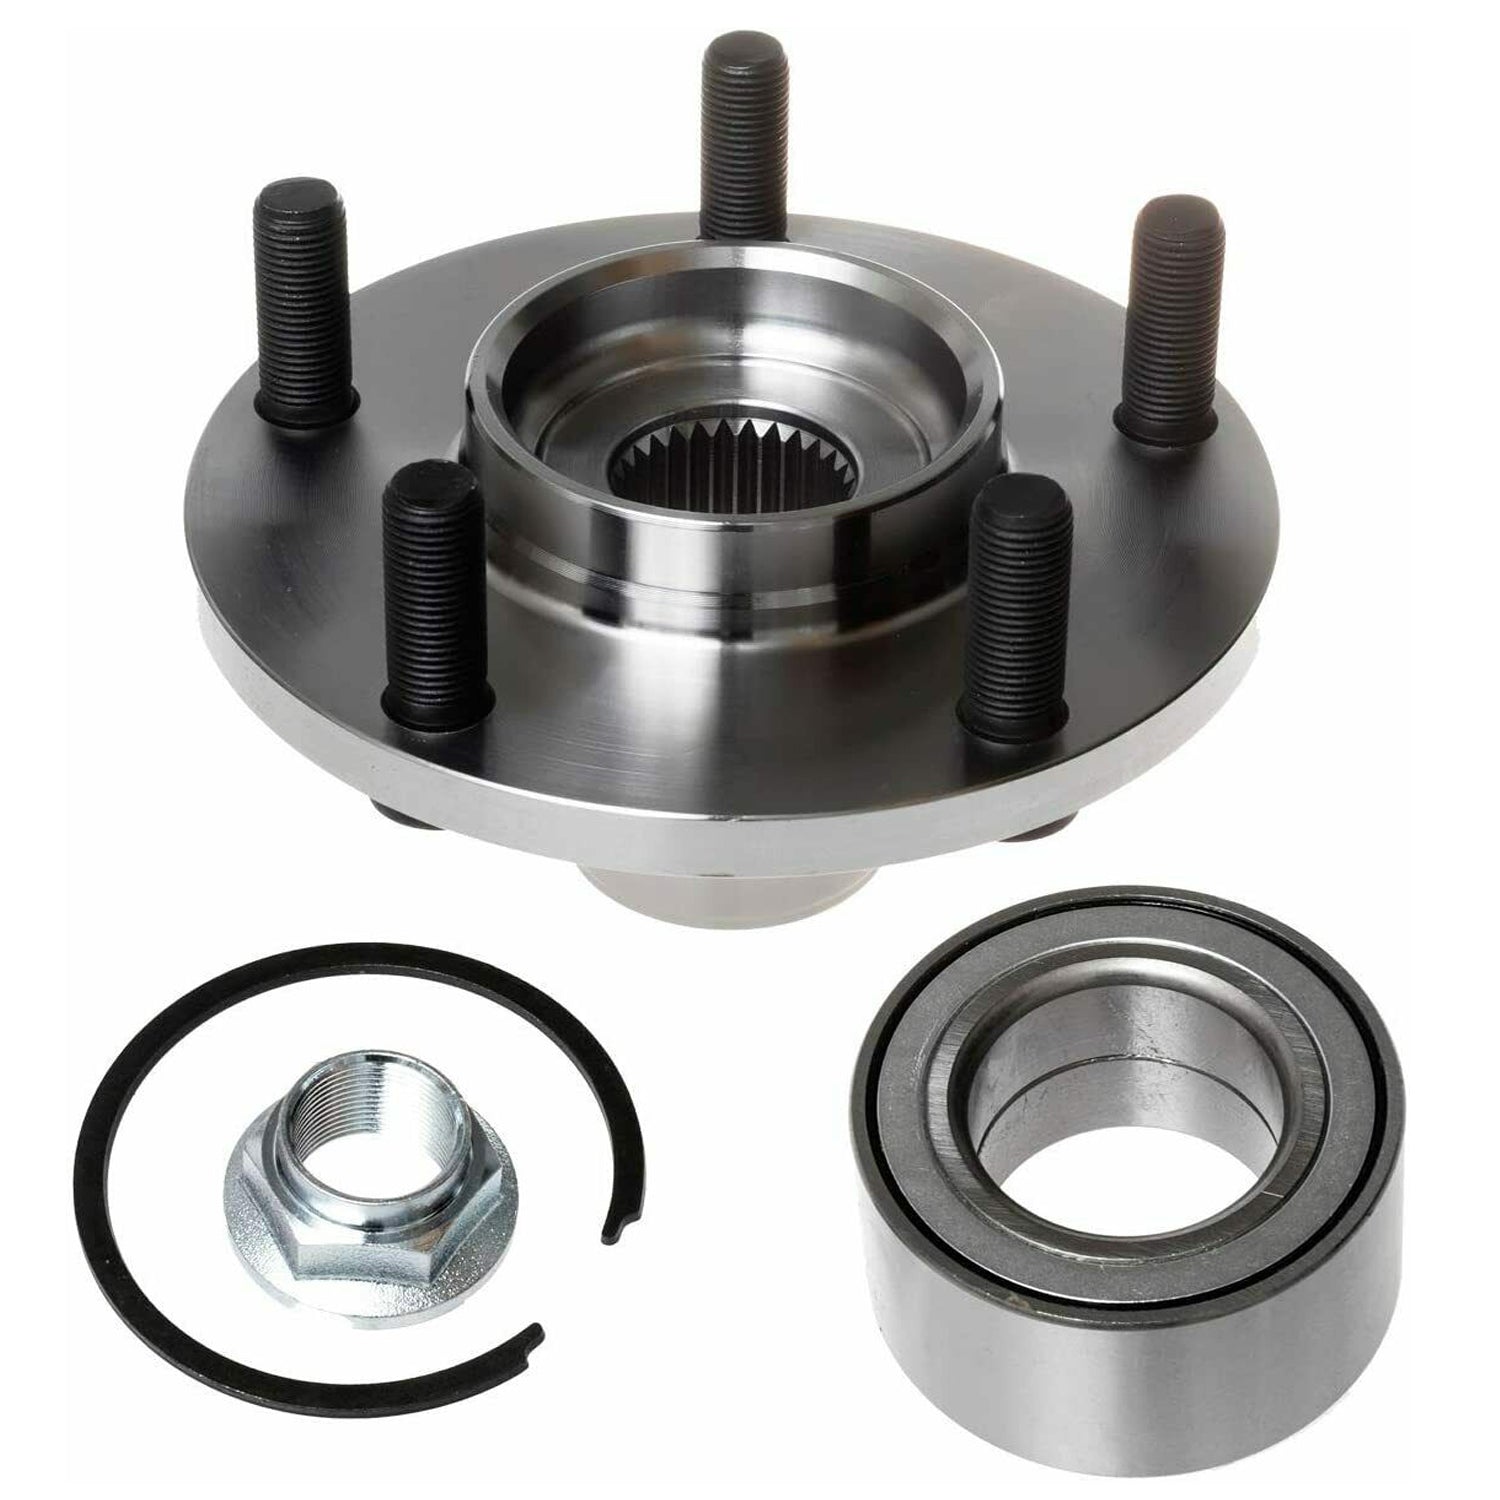 MotorbyMotor 518516 Front Wheel Bearing and Hub Assembly with 5 Lugs fits for Infiniti I30, Infiniti I35,Nissan Altima(3.5L V6 Models Only),Nissan Maxima Low-Runout OE Directly Replacement Hub Bearing MotorbyMotor